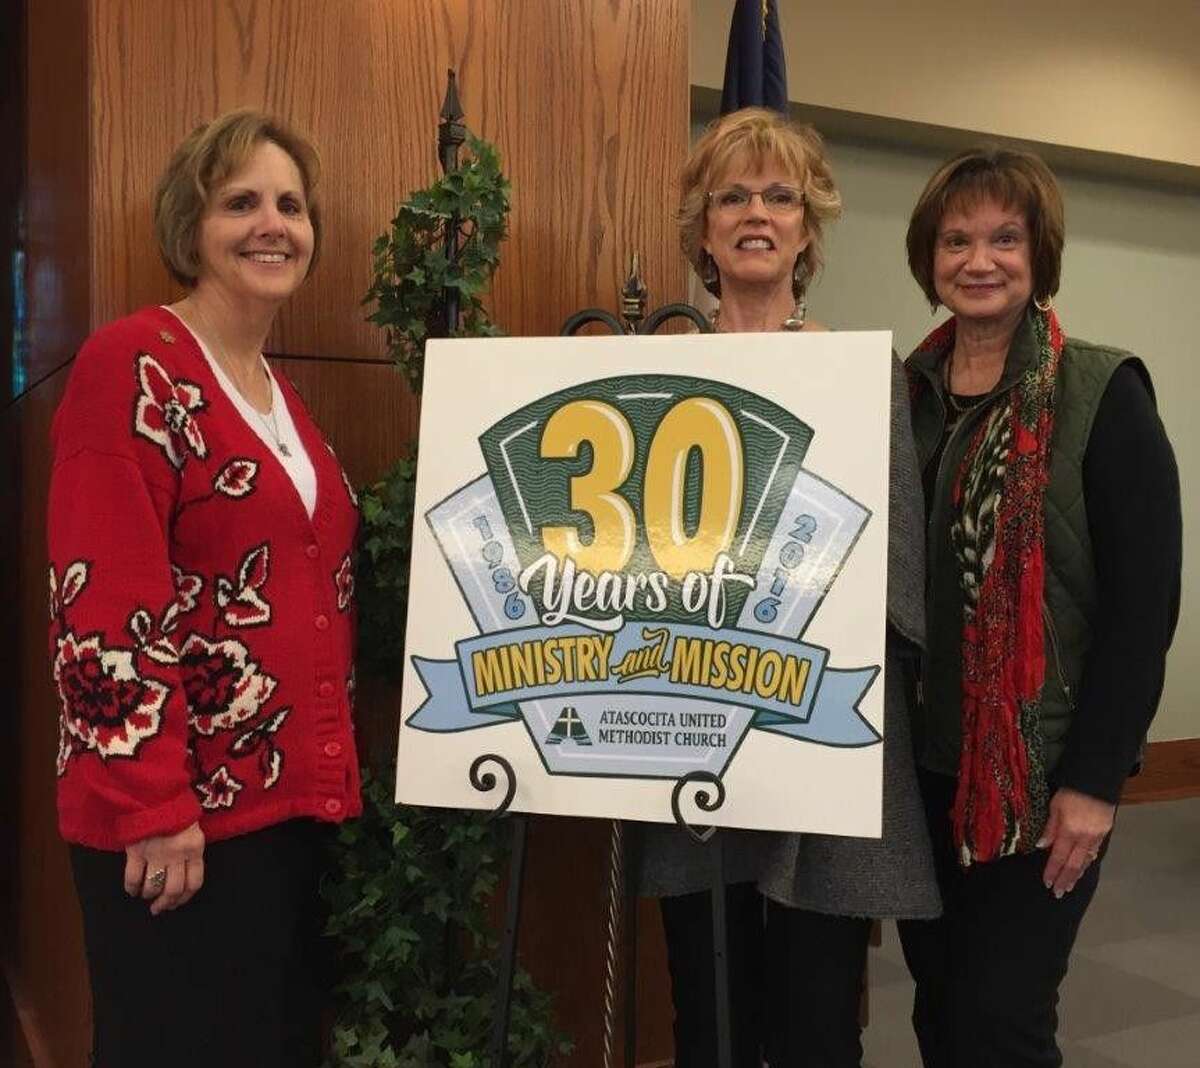 The 30th Anniversary committee, from left Rev. Deborah Proctor, Martha Theiss and Carla Hopkins. Not pictured, Nancy Shortsleeve, Charlotte Riggs and Tammie Headlee.